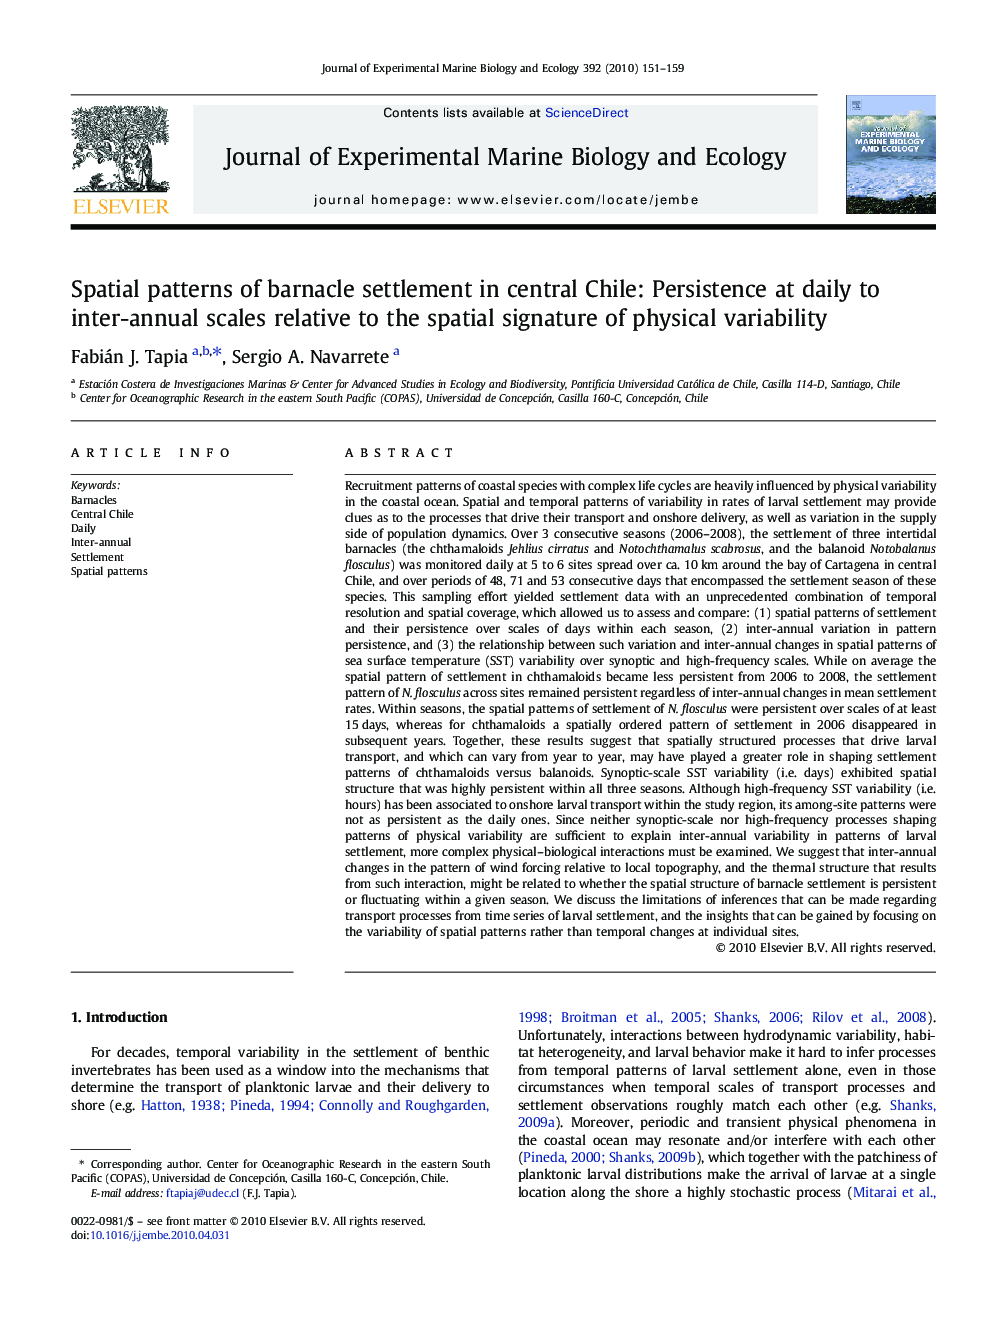 Spatial patterns of barnacle settlement in central Chile: Persistence at daily to inter-annual scales relative to the spatial signature of physical variability